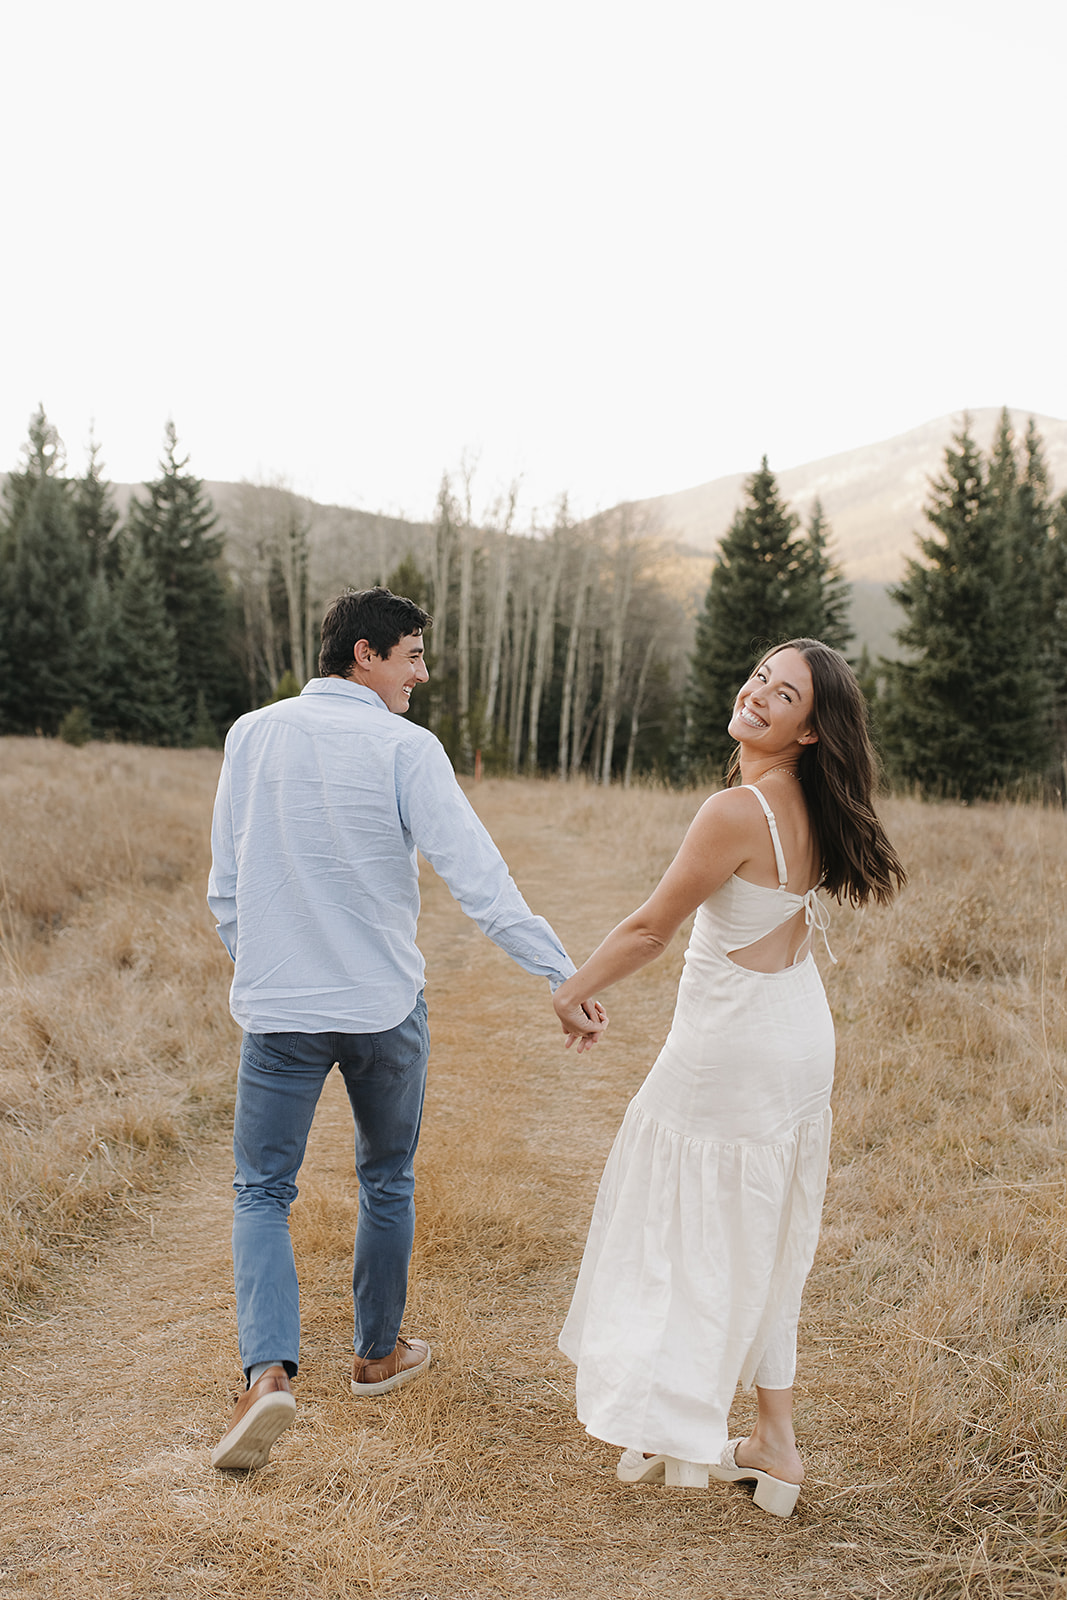 Candid laughing and smiling pose for engagement session in Evergreen, Colorado mountains